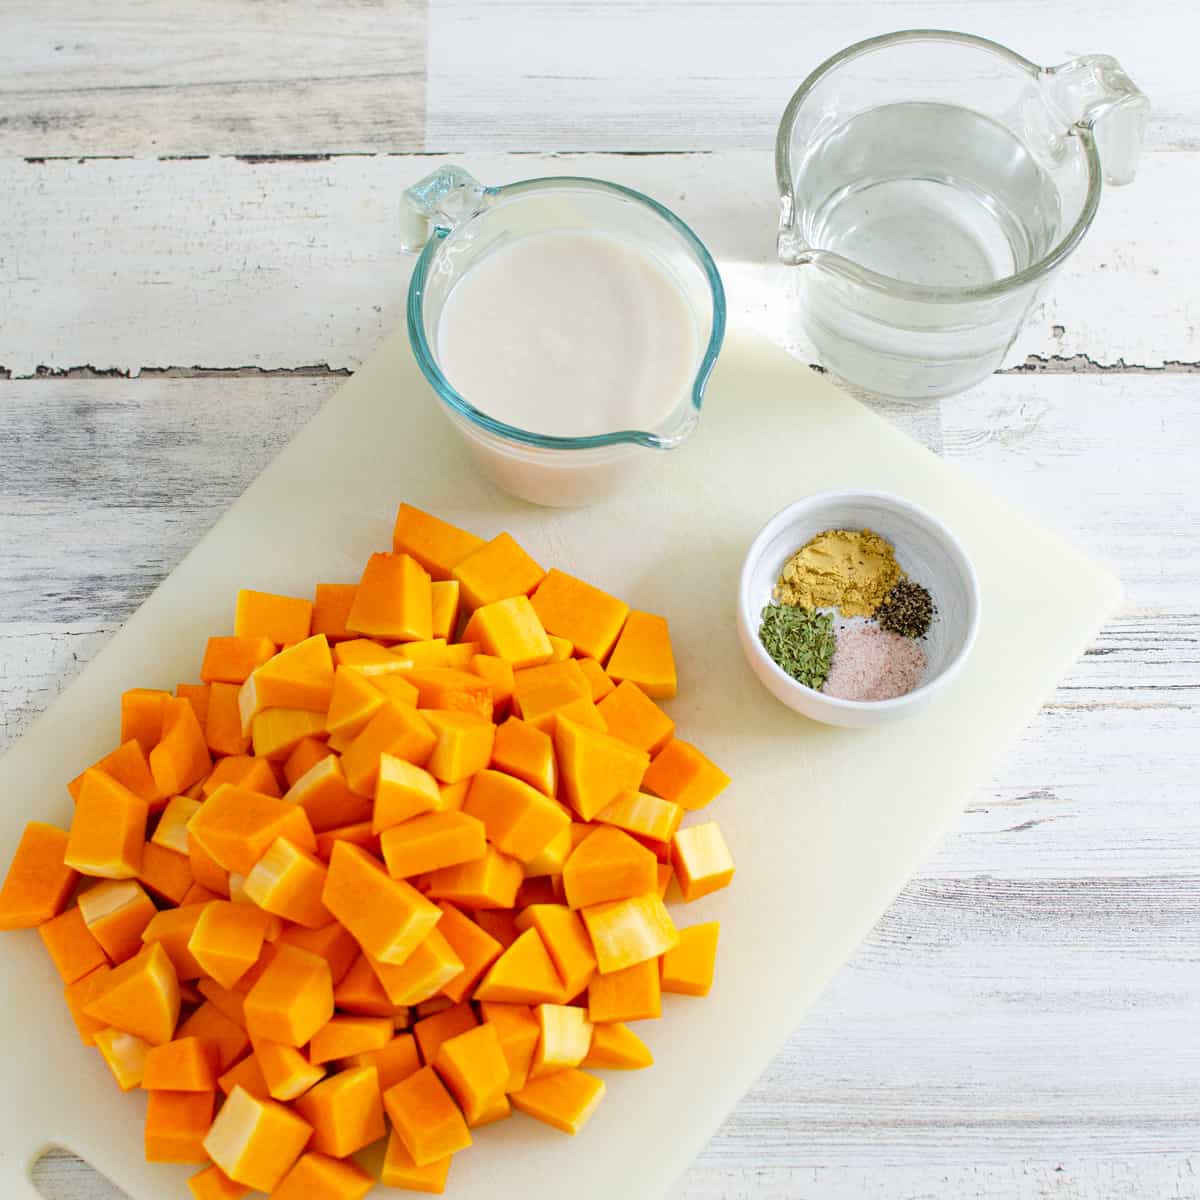 chopped butternut squash on a cutting board next to measuring cups filled with plant milk and water and a small bowl with spices